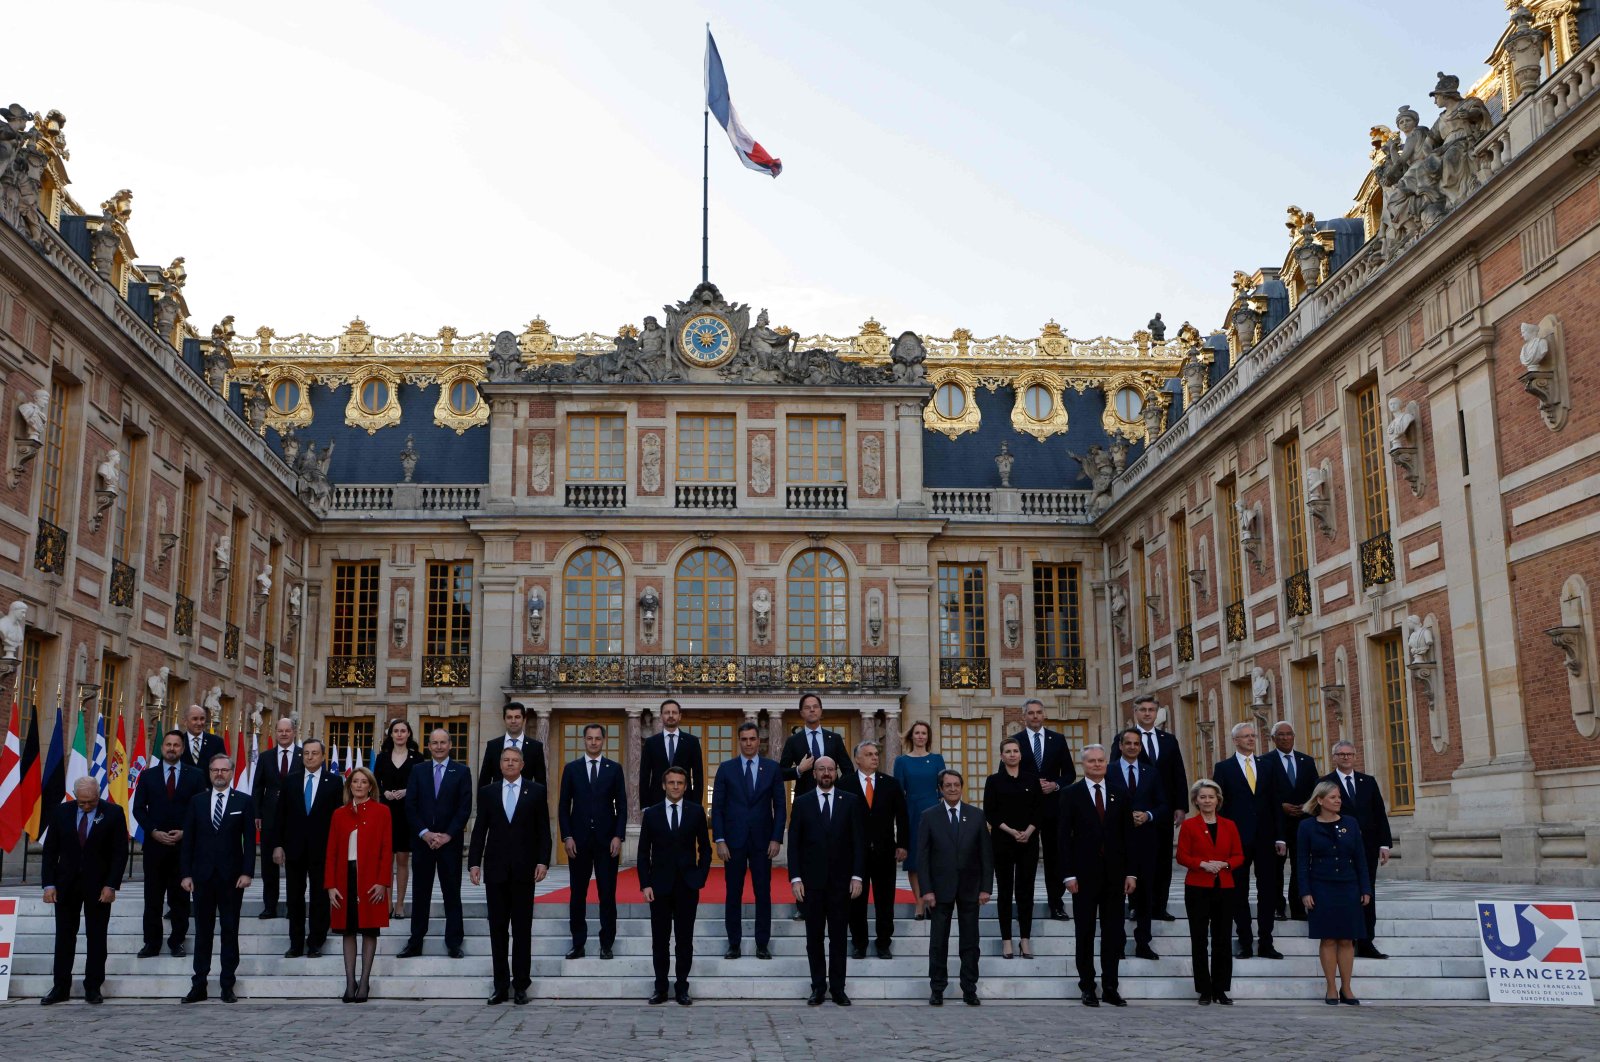 French President Emmanuel Macron and EU leaders pose for a group photo at the Palace of Versailles, near Paris, France, March 10, 2022, ahead of the EU leaders summit to discuss the fallout of Russia&#039;s invasion of Ukraine. (AFP Photo)